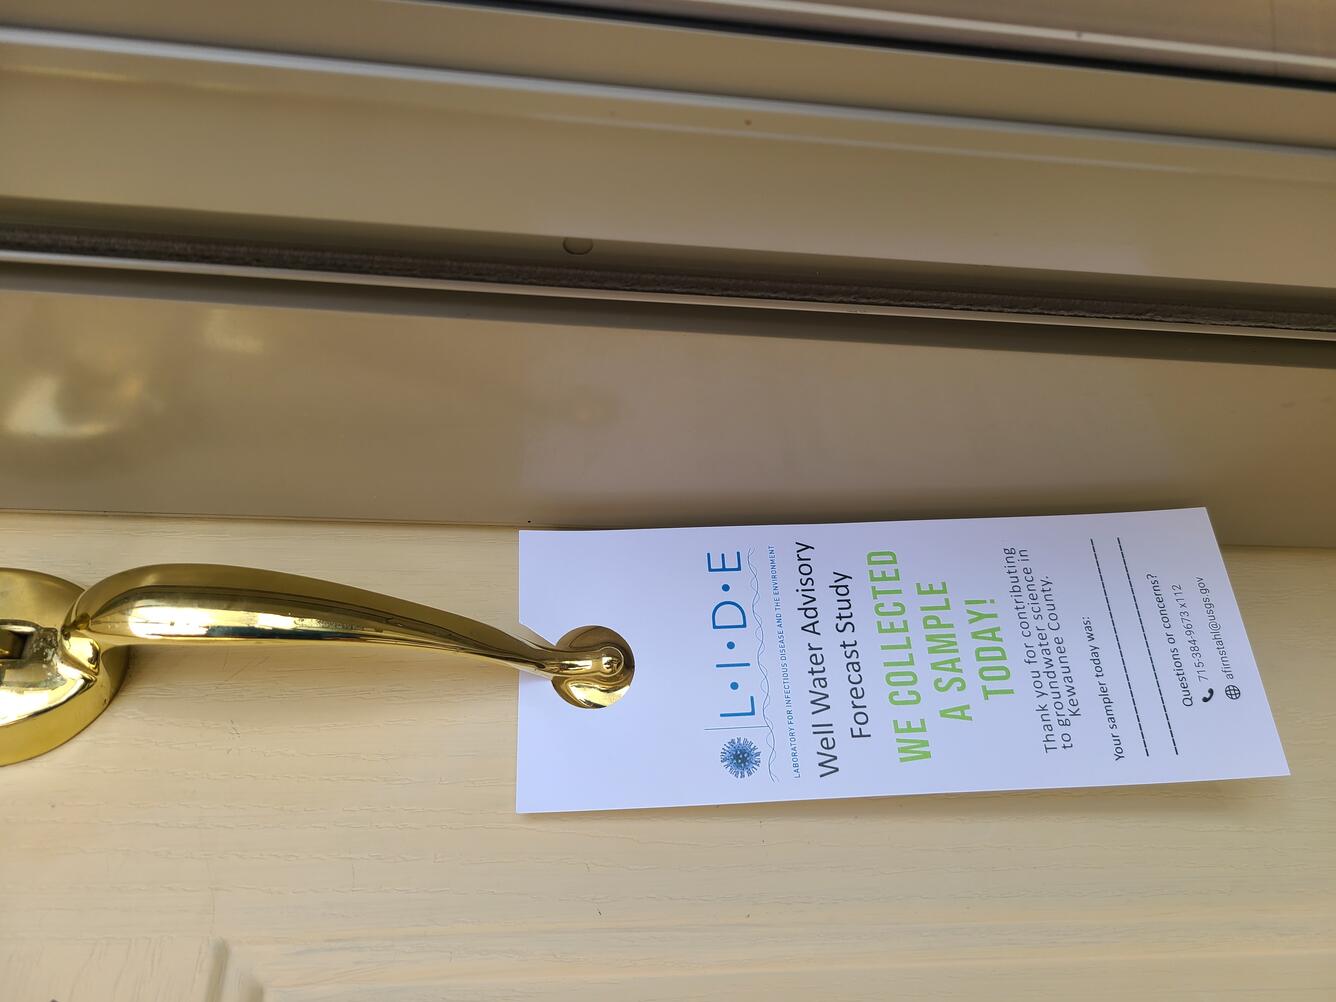 Paper flyer hanging from door handle for a wall water advisory forecast study